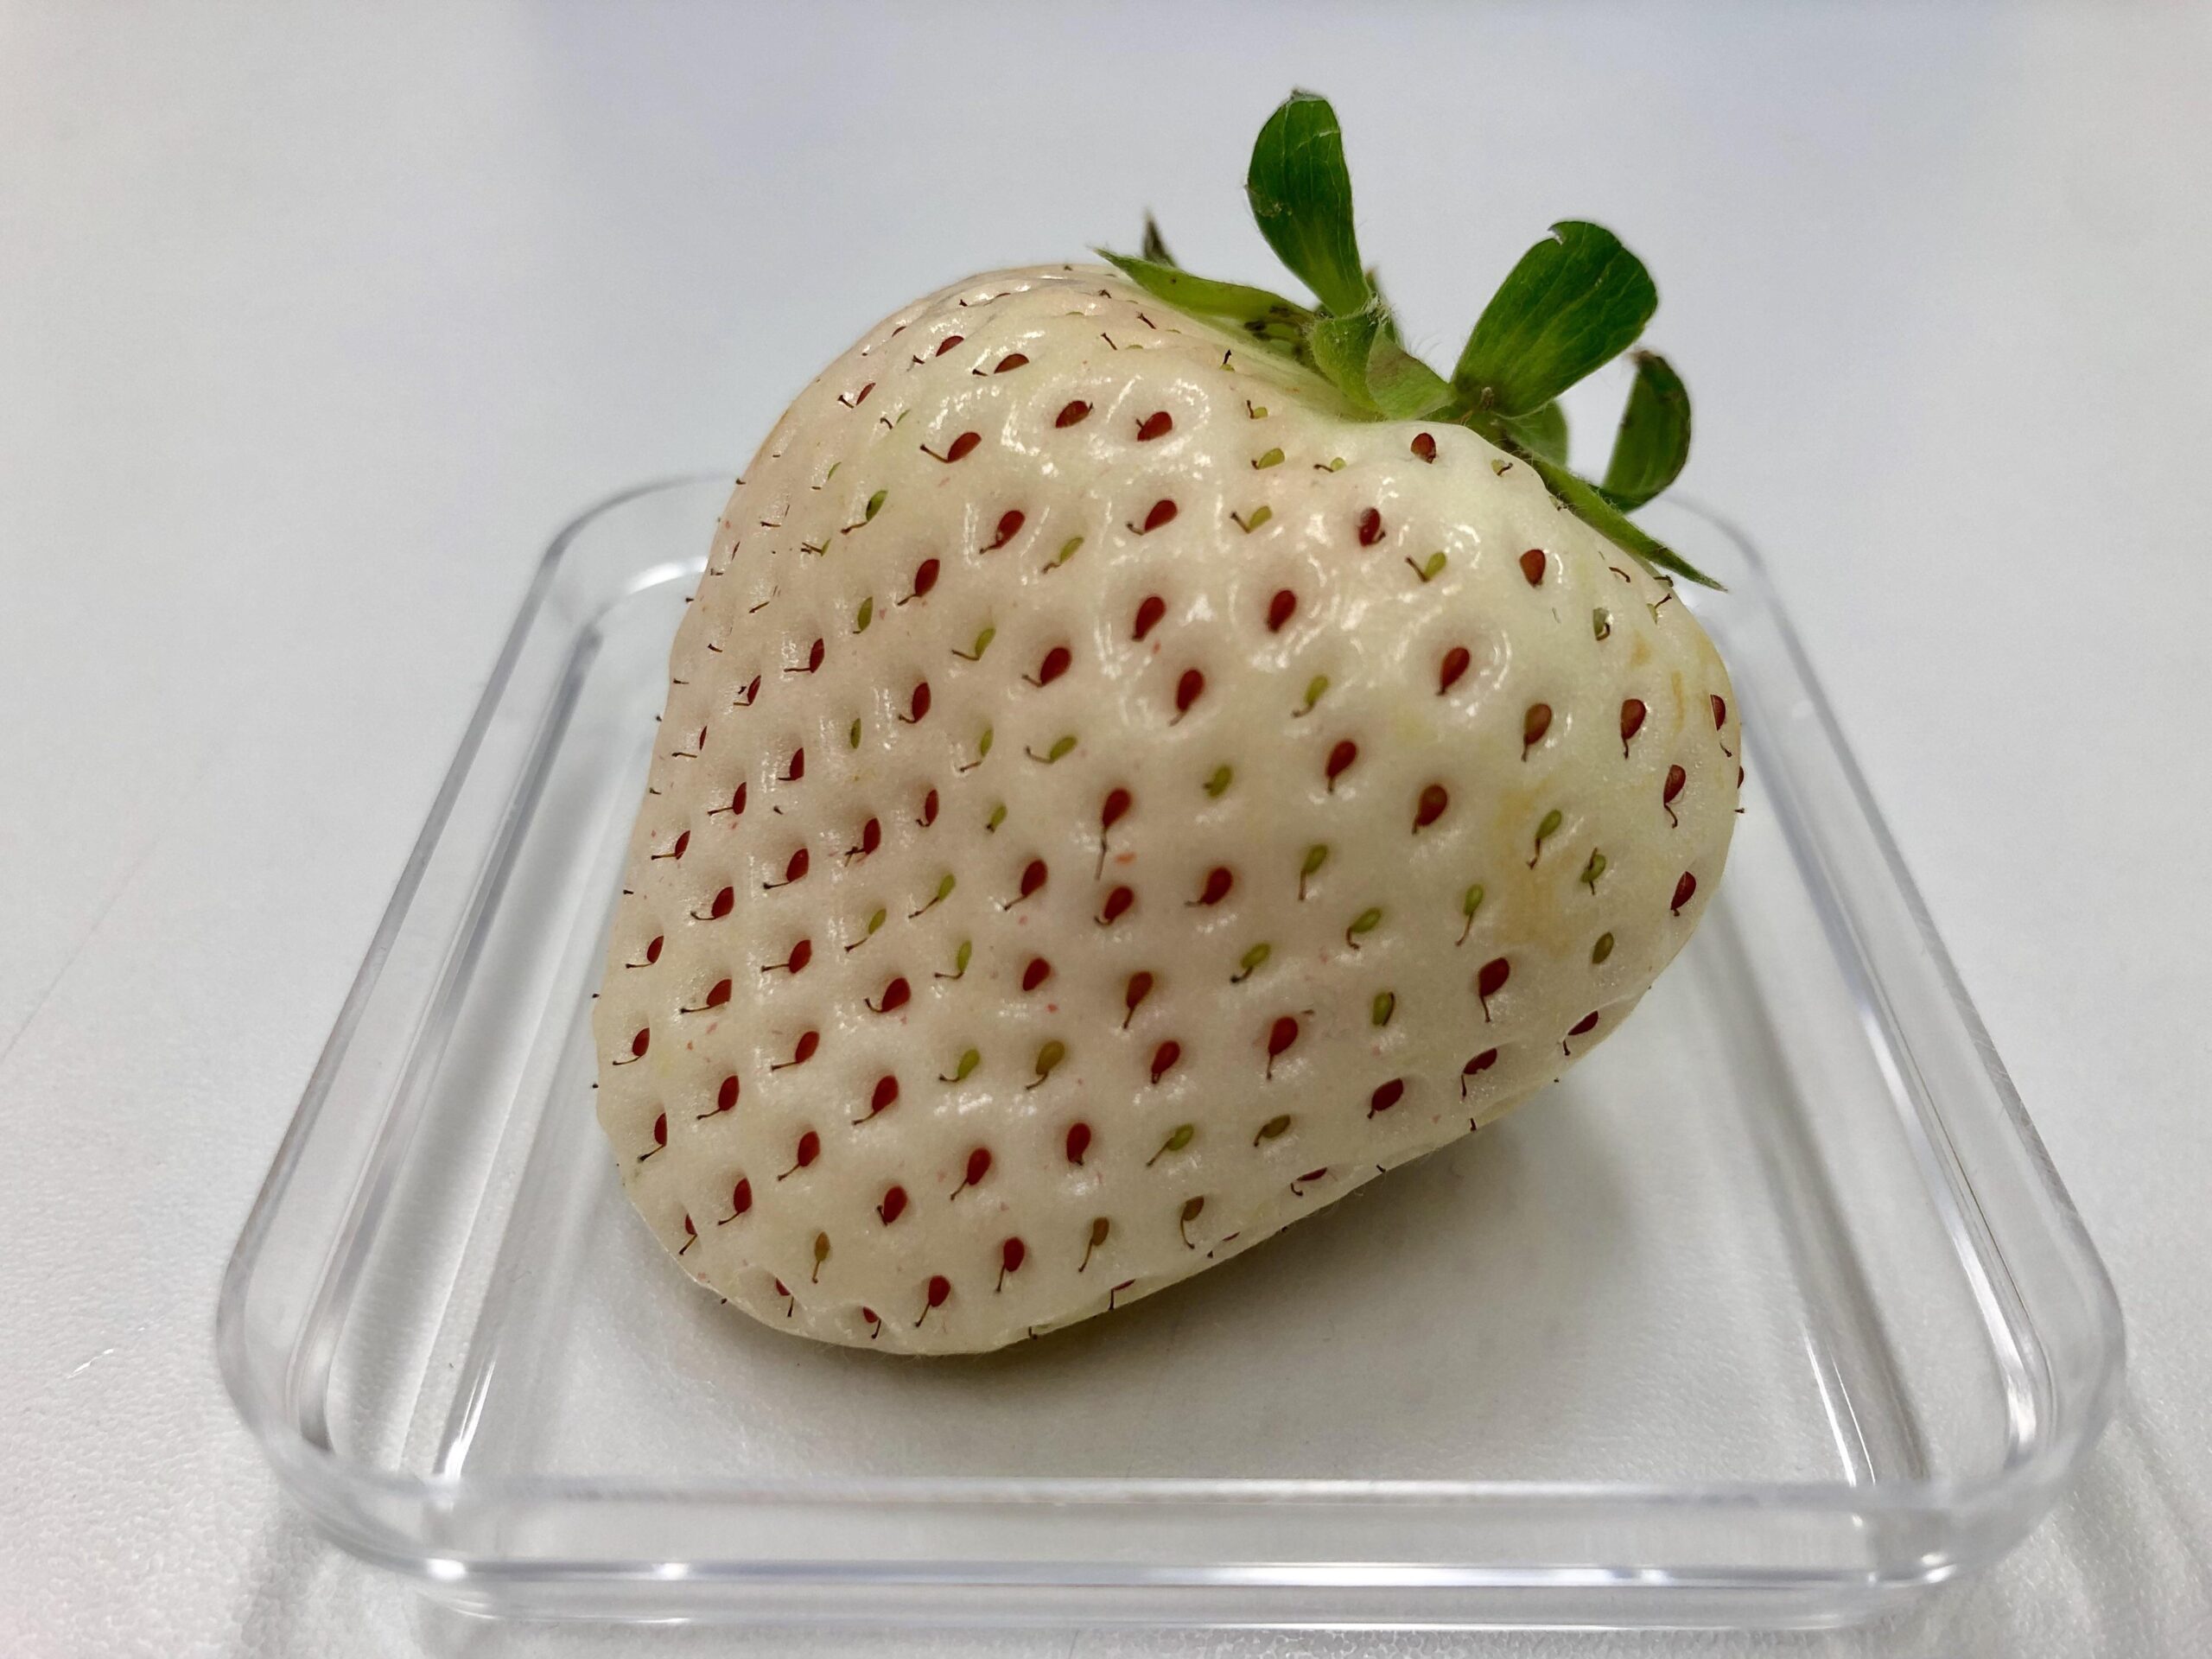 Strawberries: a white strawberry sits in a dish